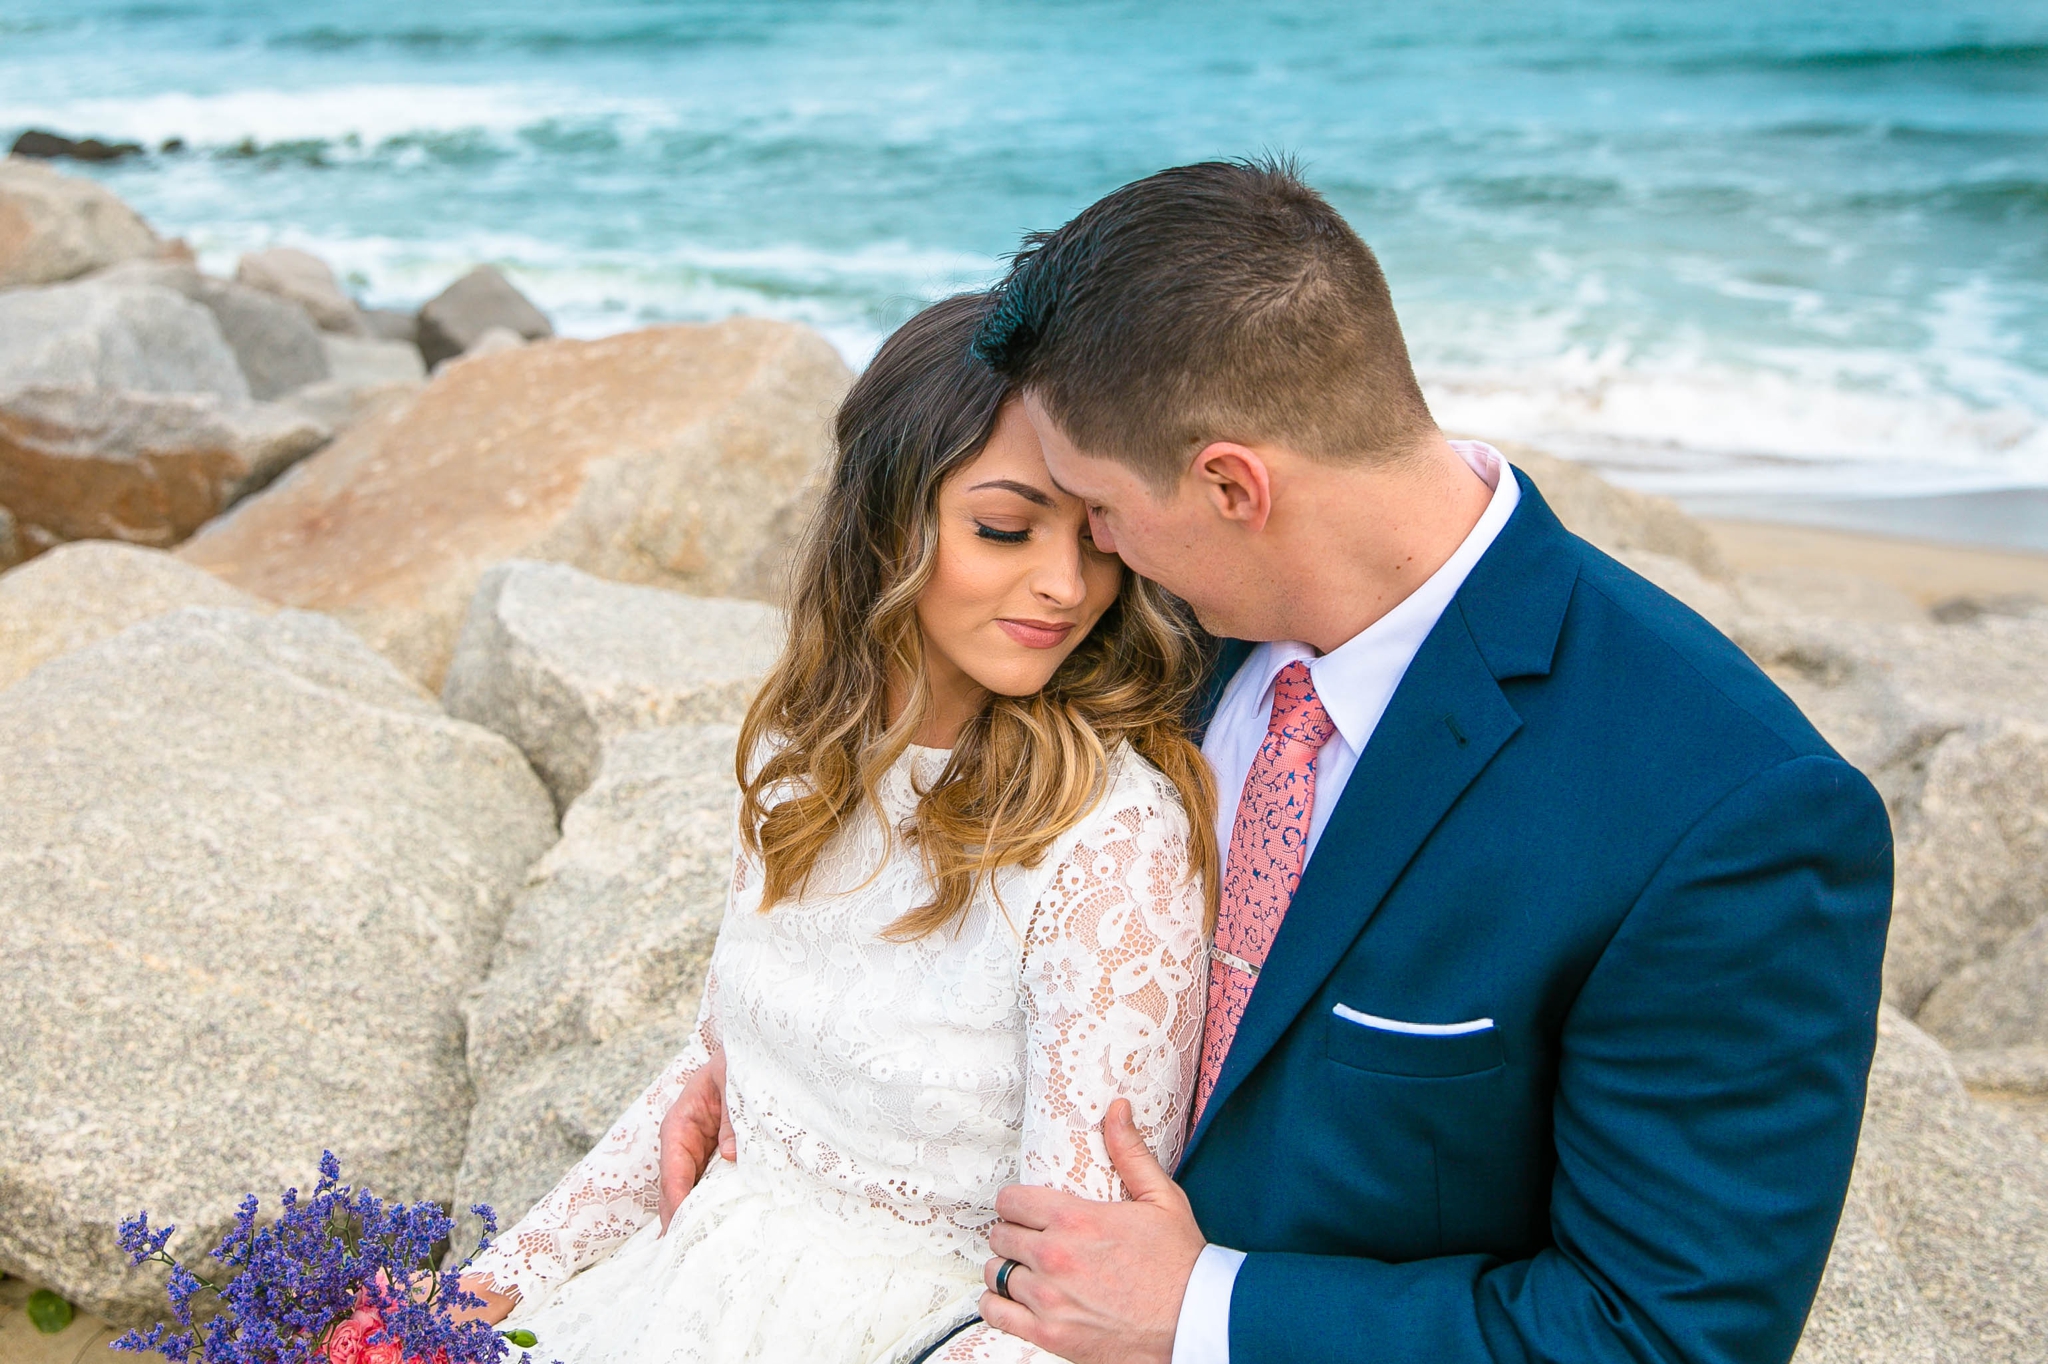 Clear blue water Beach Elopement Portraits - Bride and Groom on top of the Cliffs - - dress by asos with purple and pink flowers and navy suit - oahu hawaii wedding photographer